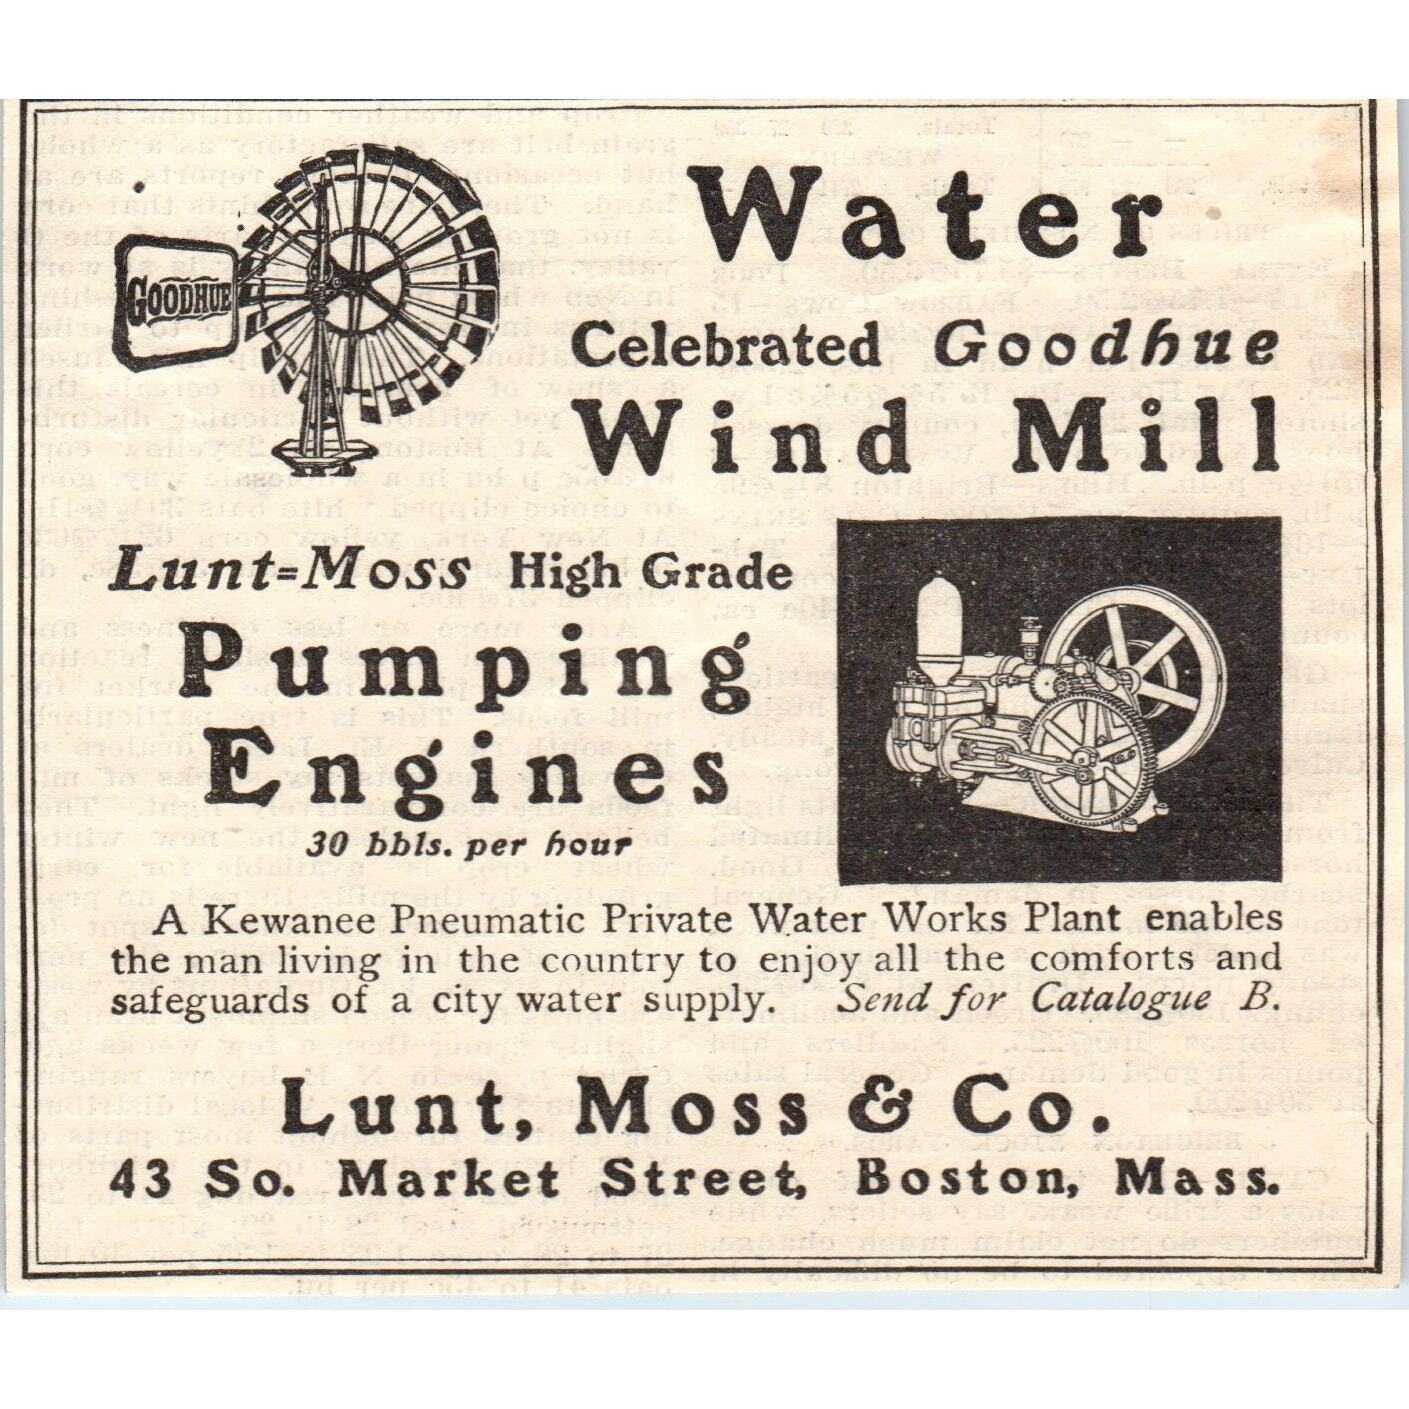 Lunt, Moss & Co Water Wind Mill Pumping Engines Boston 1905 Magazine Ad AF1-NEH